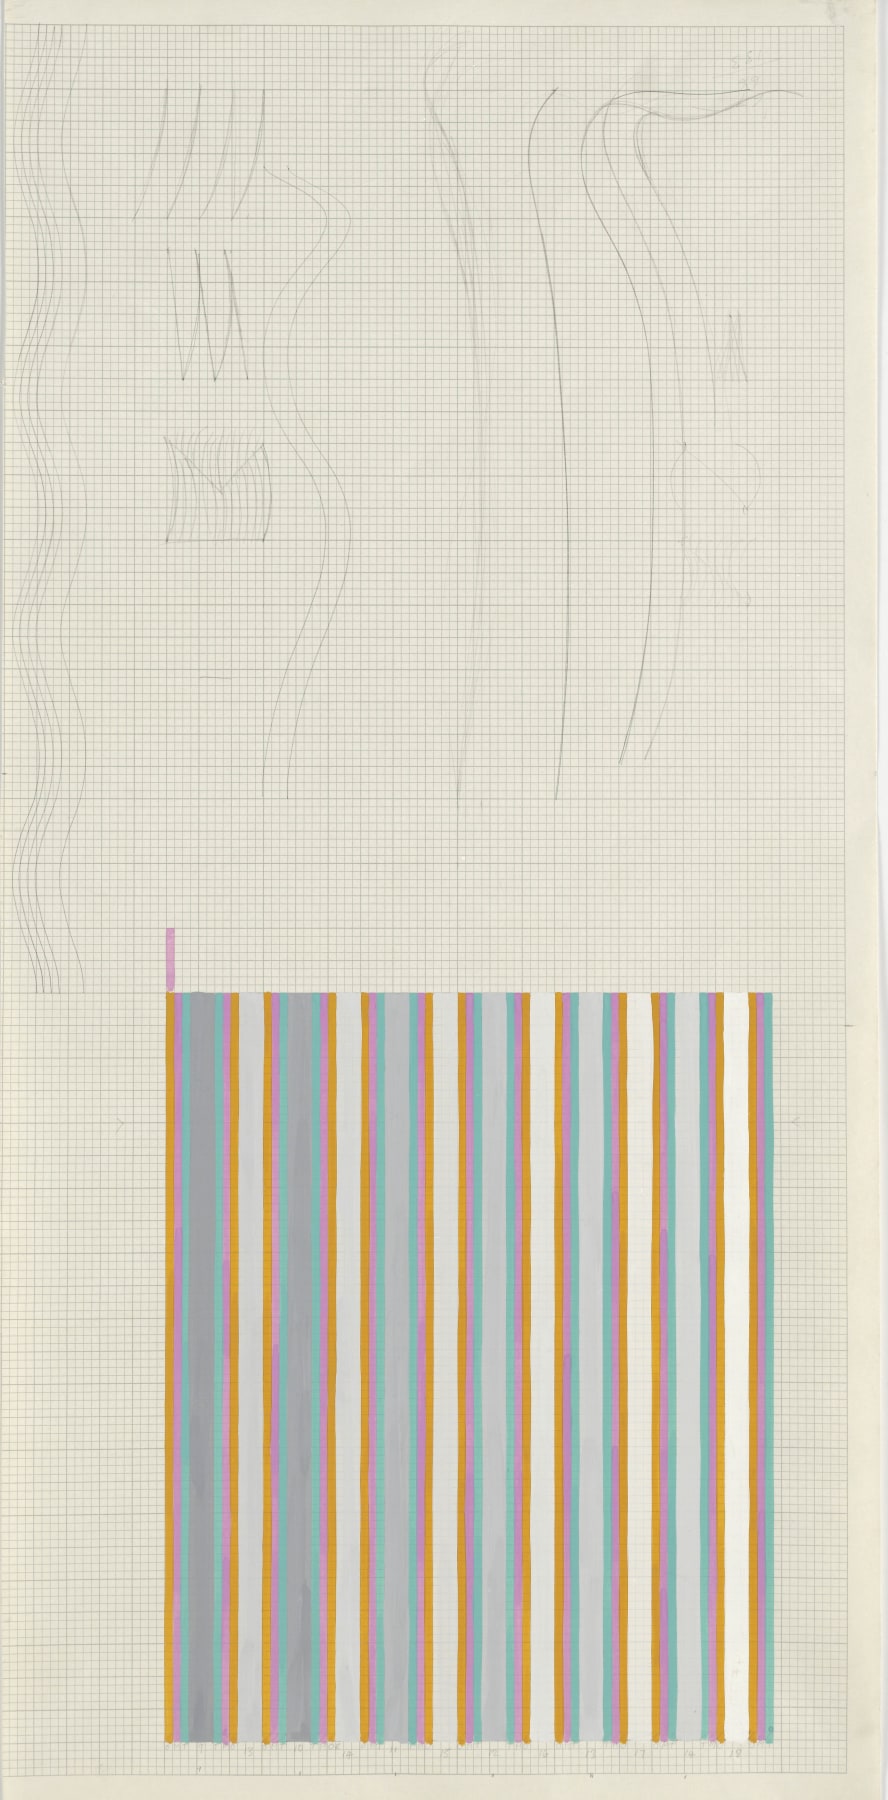 Bridget Riley, Untitled (Related to &#039;Sound&#039;),&nbsp;1972